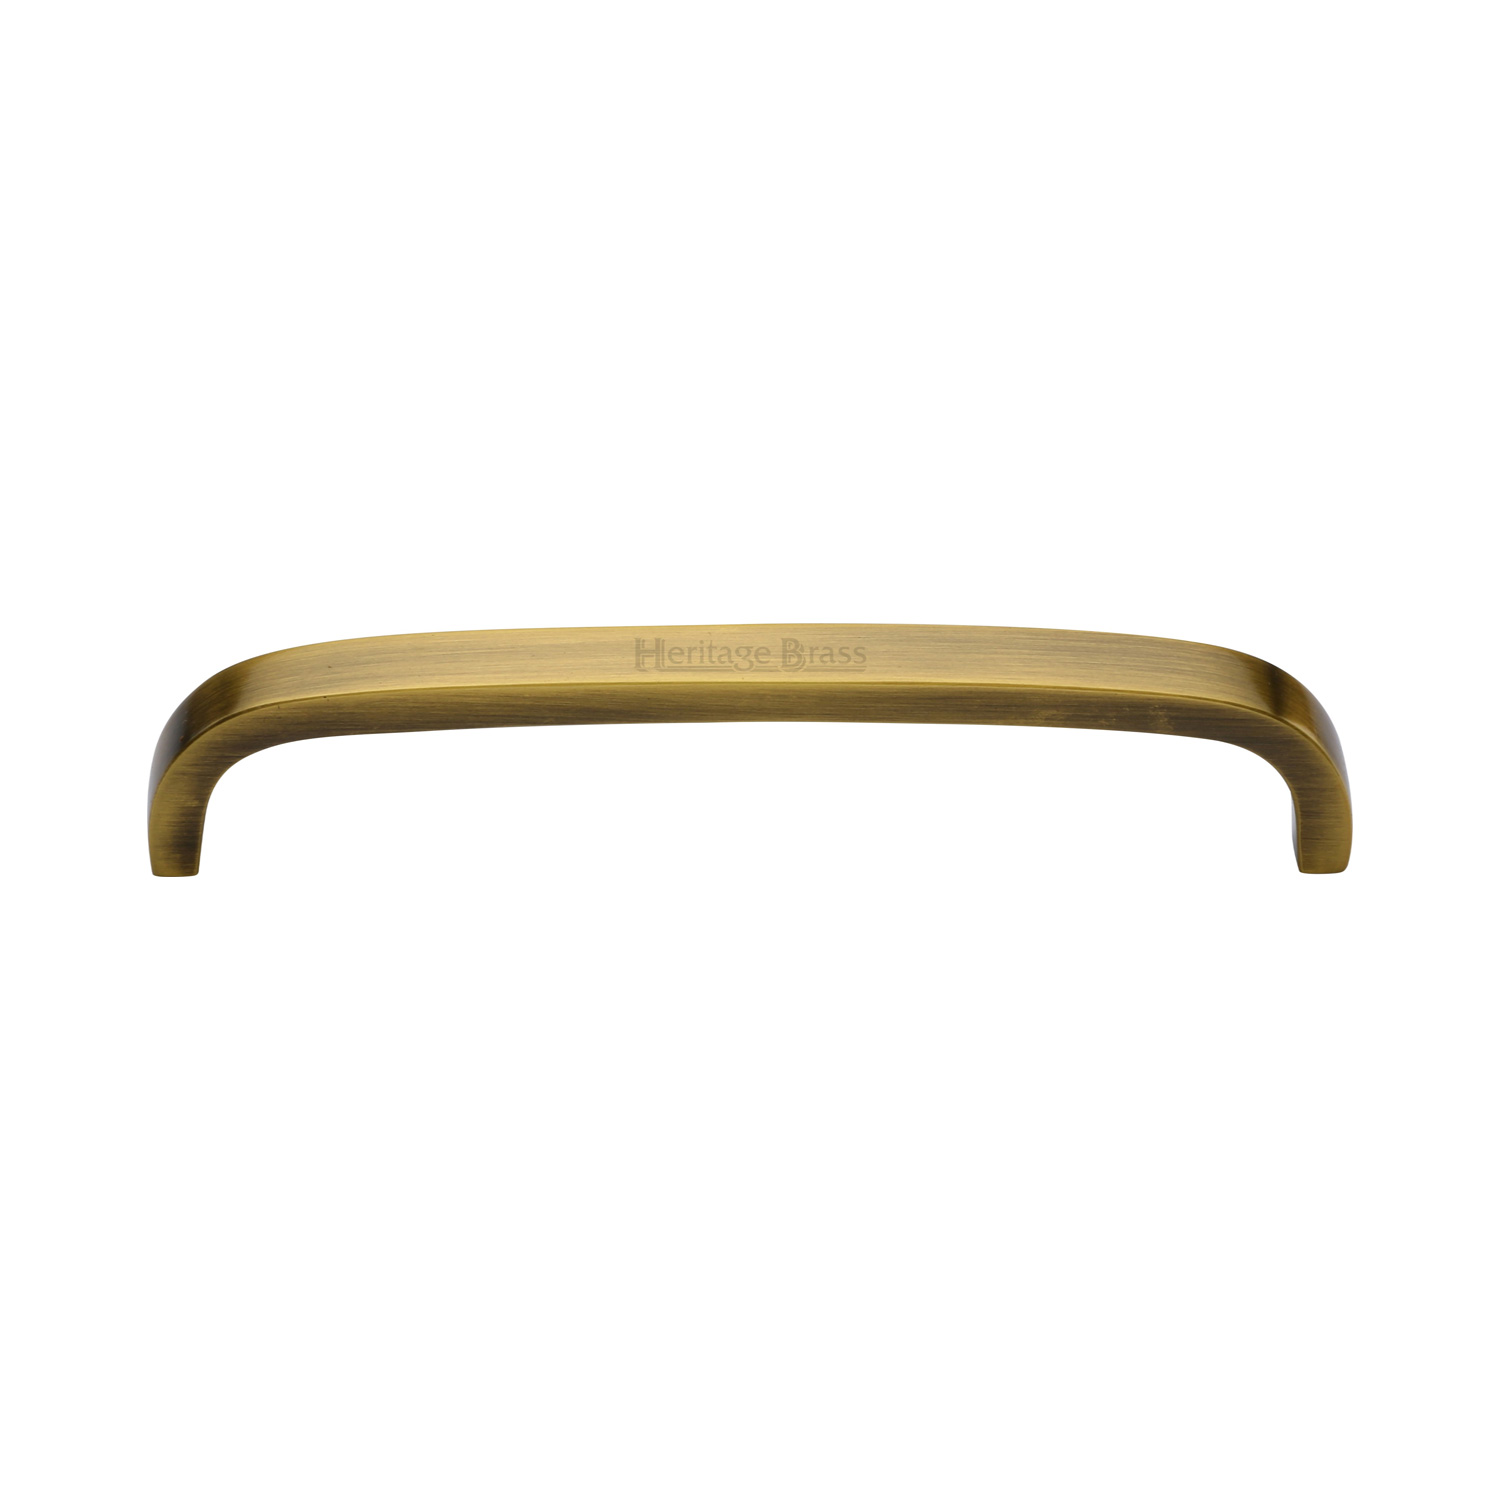 Heritage Brass Cabinet Pull D Shaped 152mm c/c